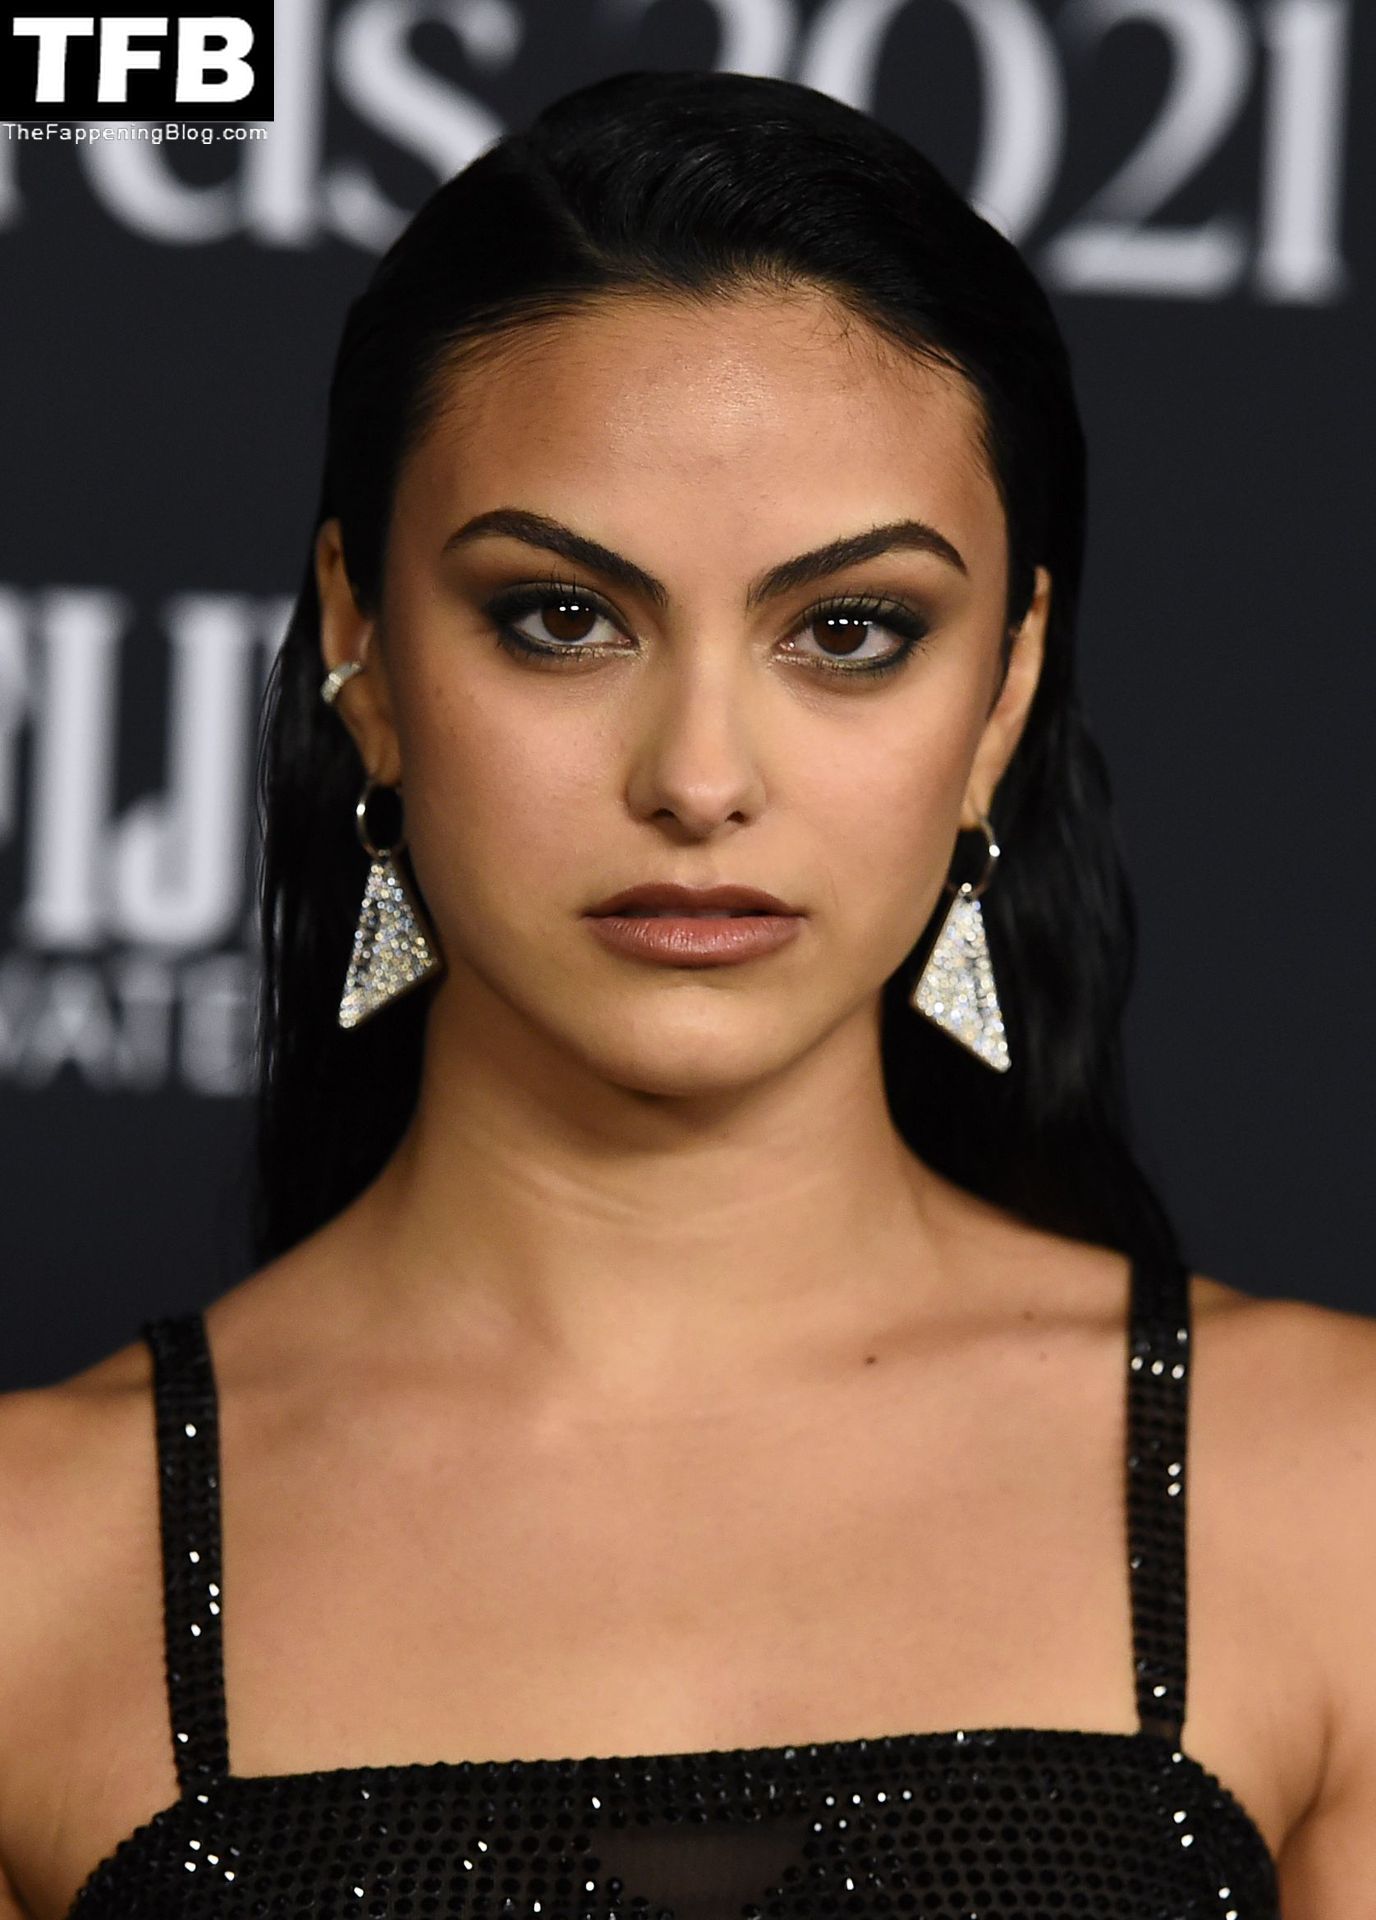 Camila-Mendes-See-Through-Tits-The-Fappening-Blog-73.jpg